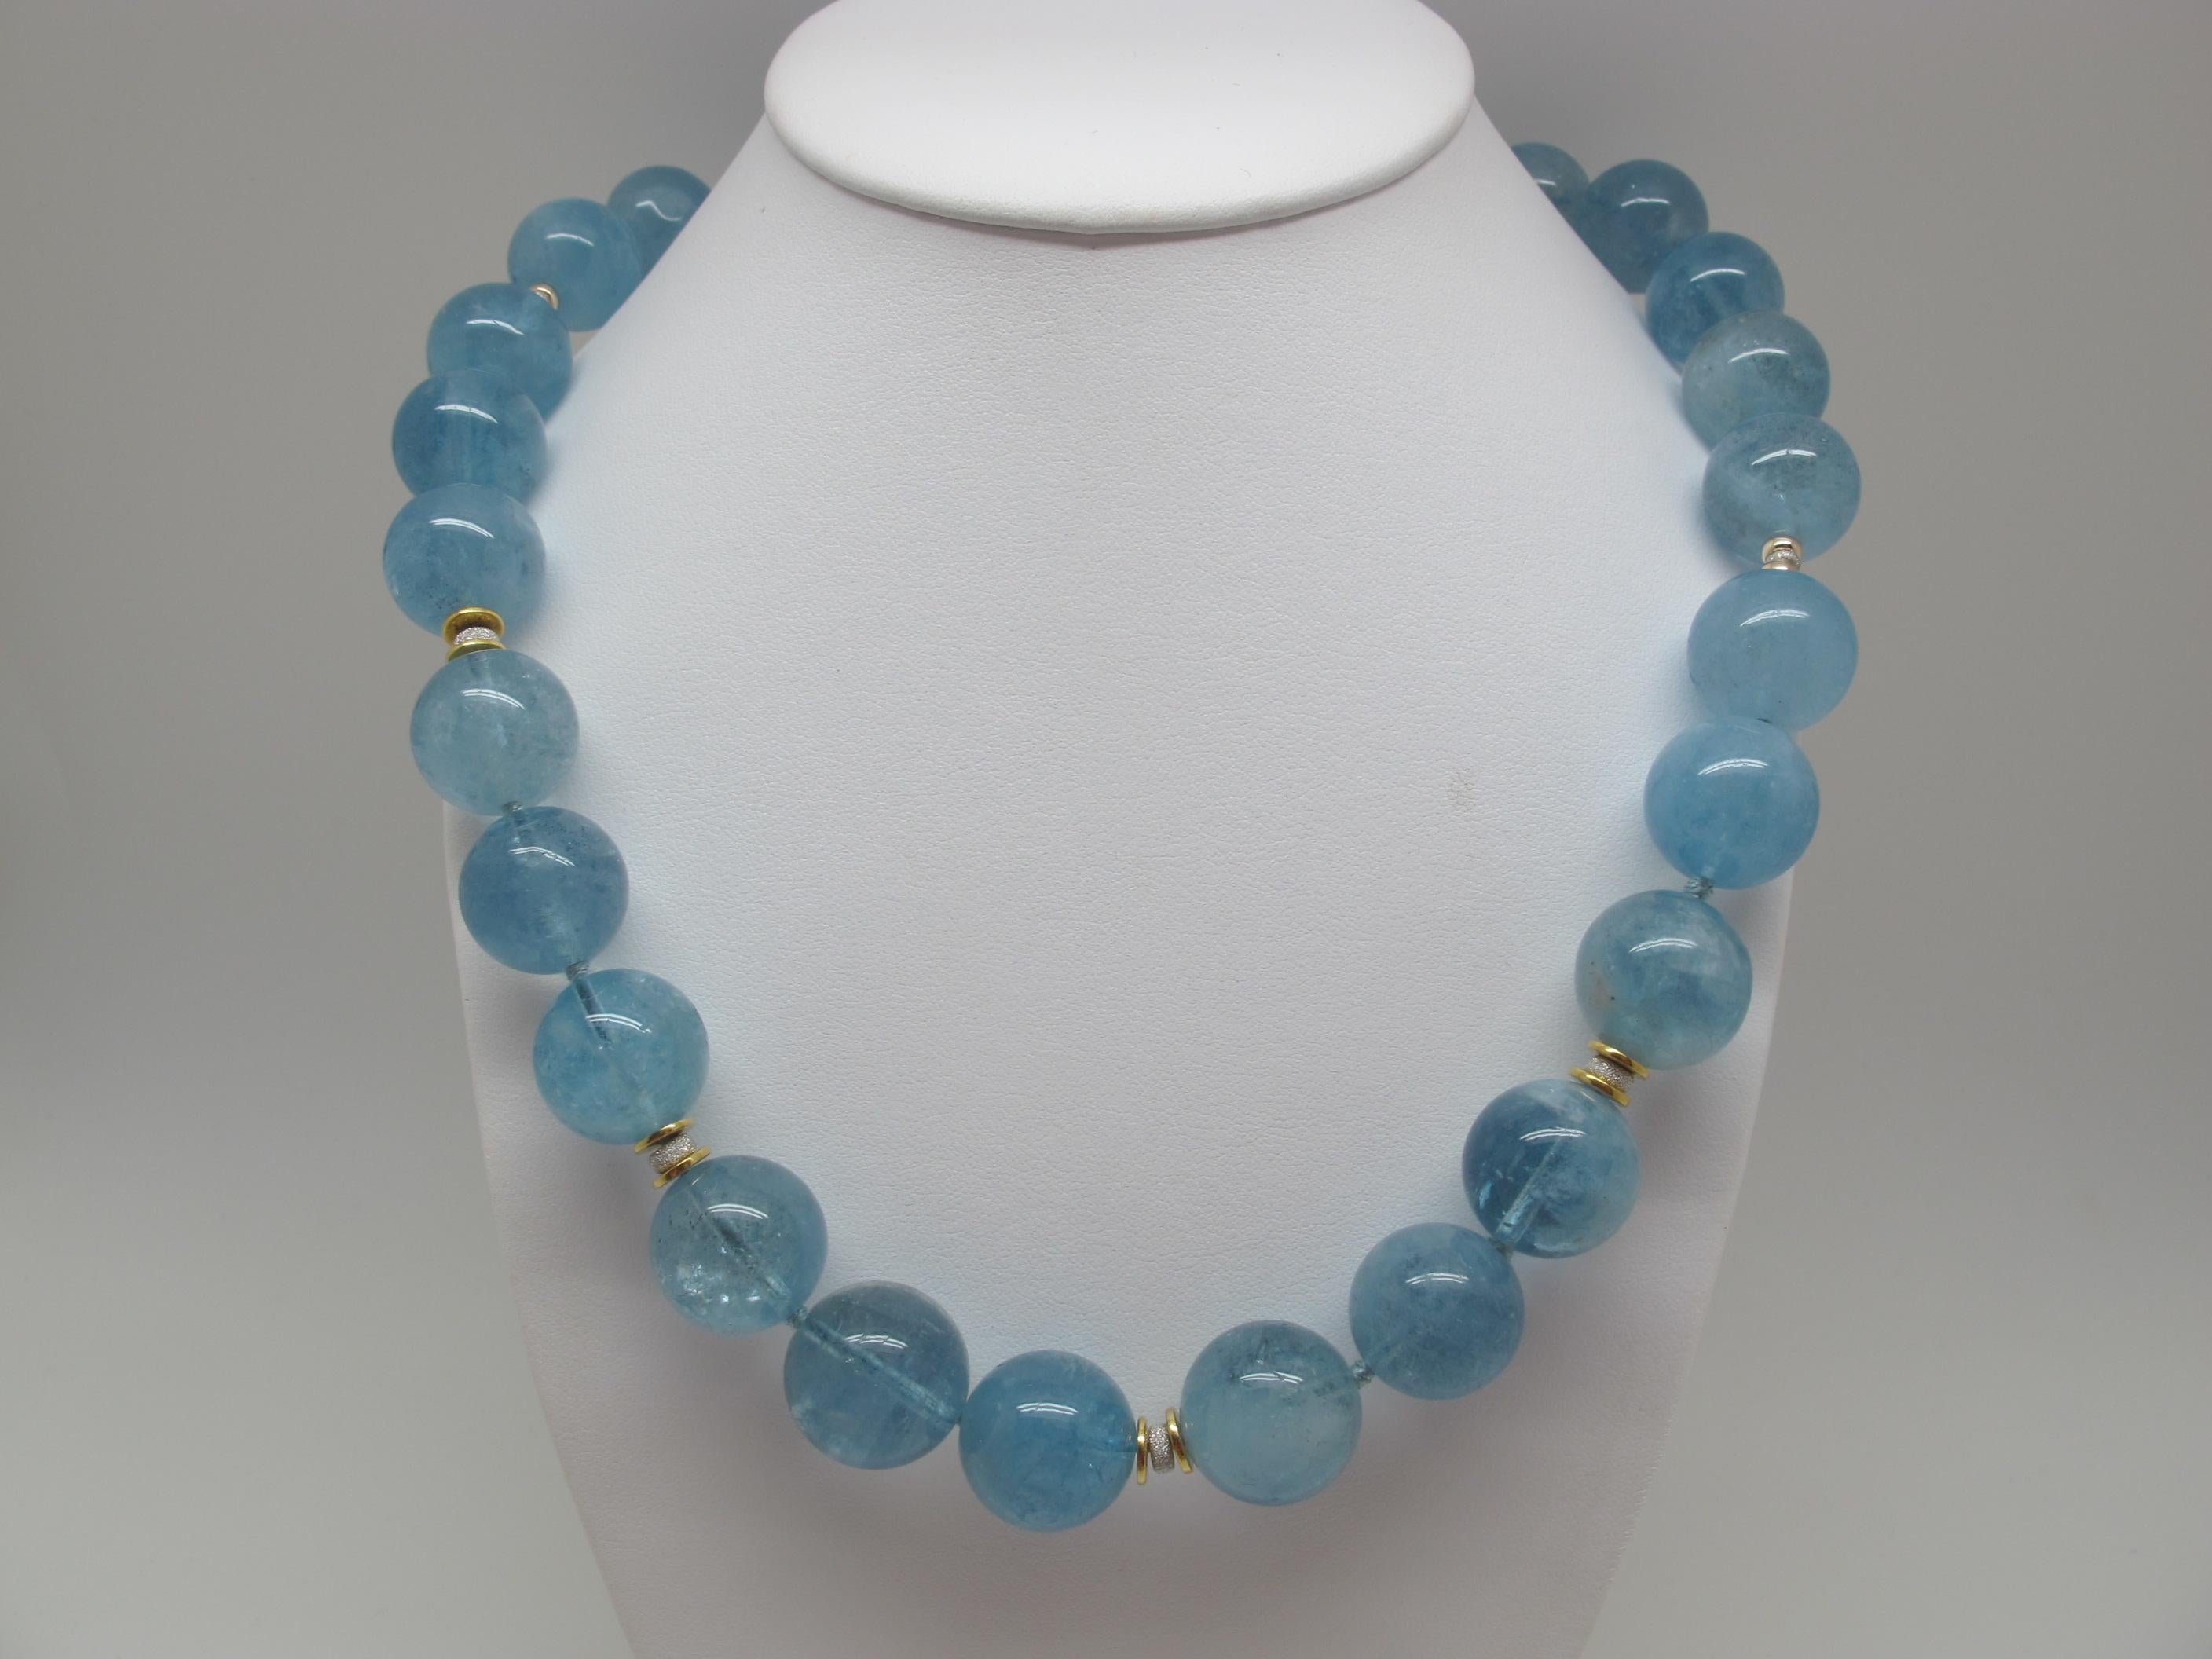 This simply stunning aquamarine beaded necklace is the perfect addition to any jewelry collection. The 16 millimeter vibrant aquamarine beads are extremely high quality and rare. The bright 14K and 22K yellow gold spacers elevate this piece to new